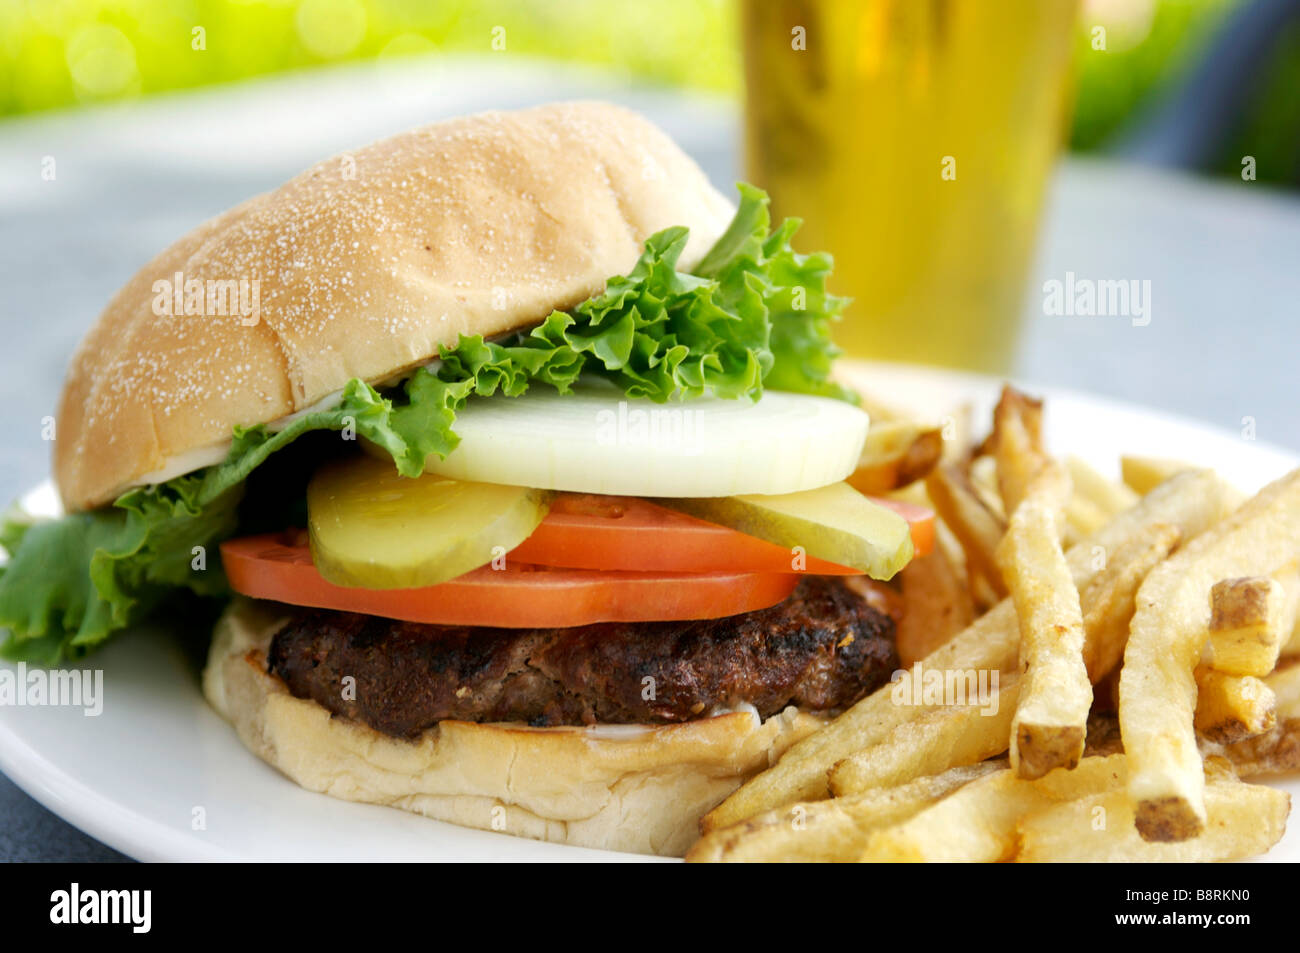 Hamburger with fries.  Loaded burger with lettuce, tomato, pickle, and a glass of beer. Stock Photo